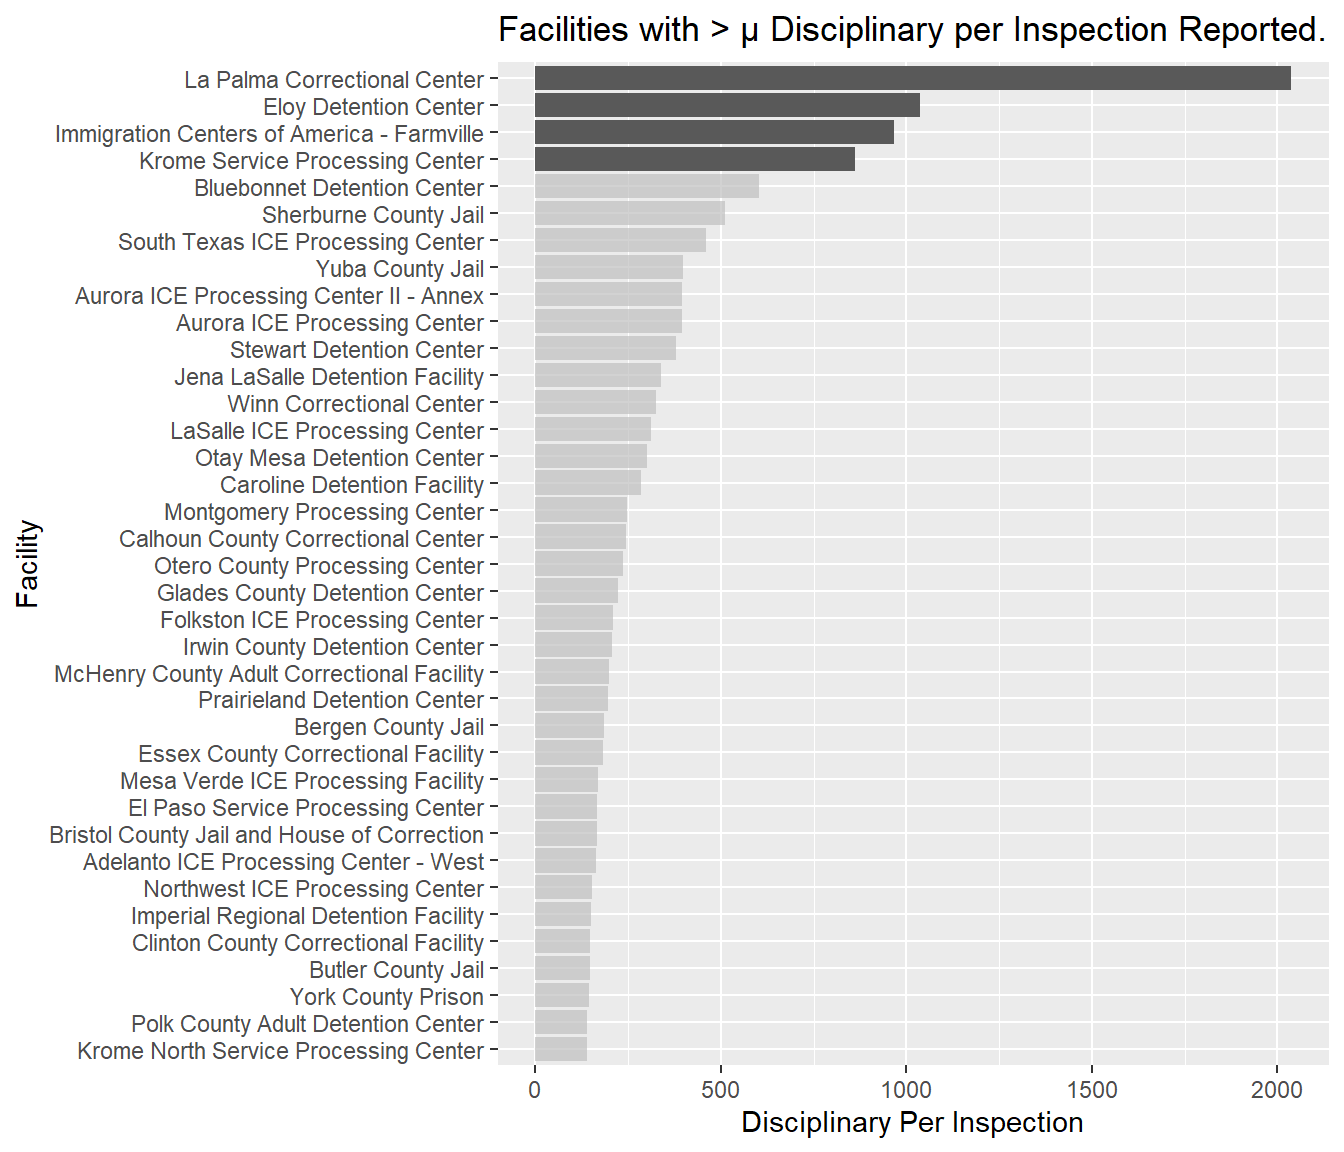 Bar plot of facilities with greater than average number of Disciplinary infractions filed by inspection.